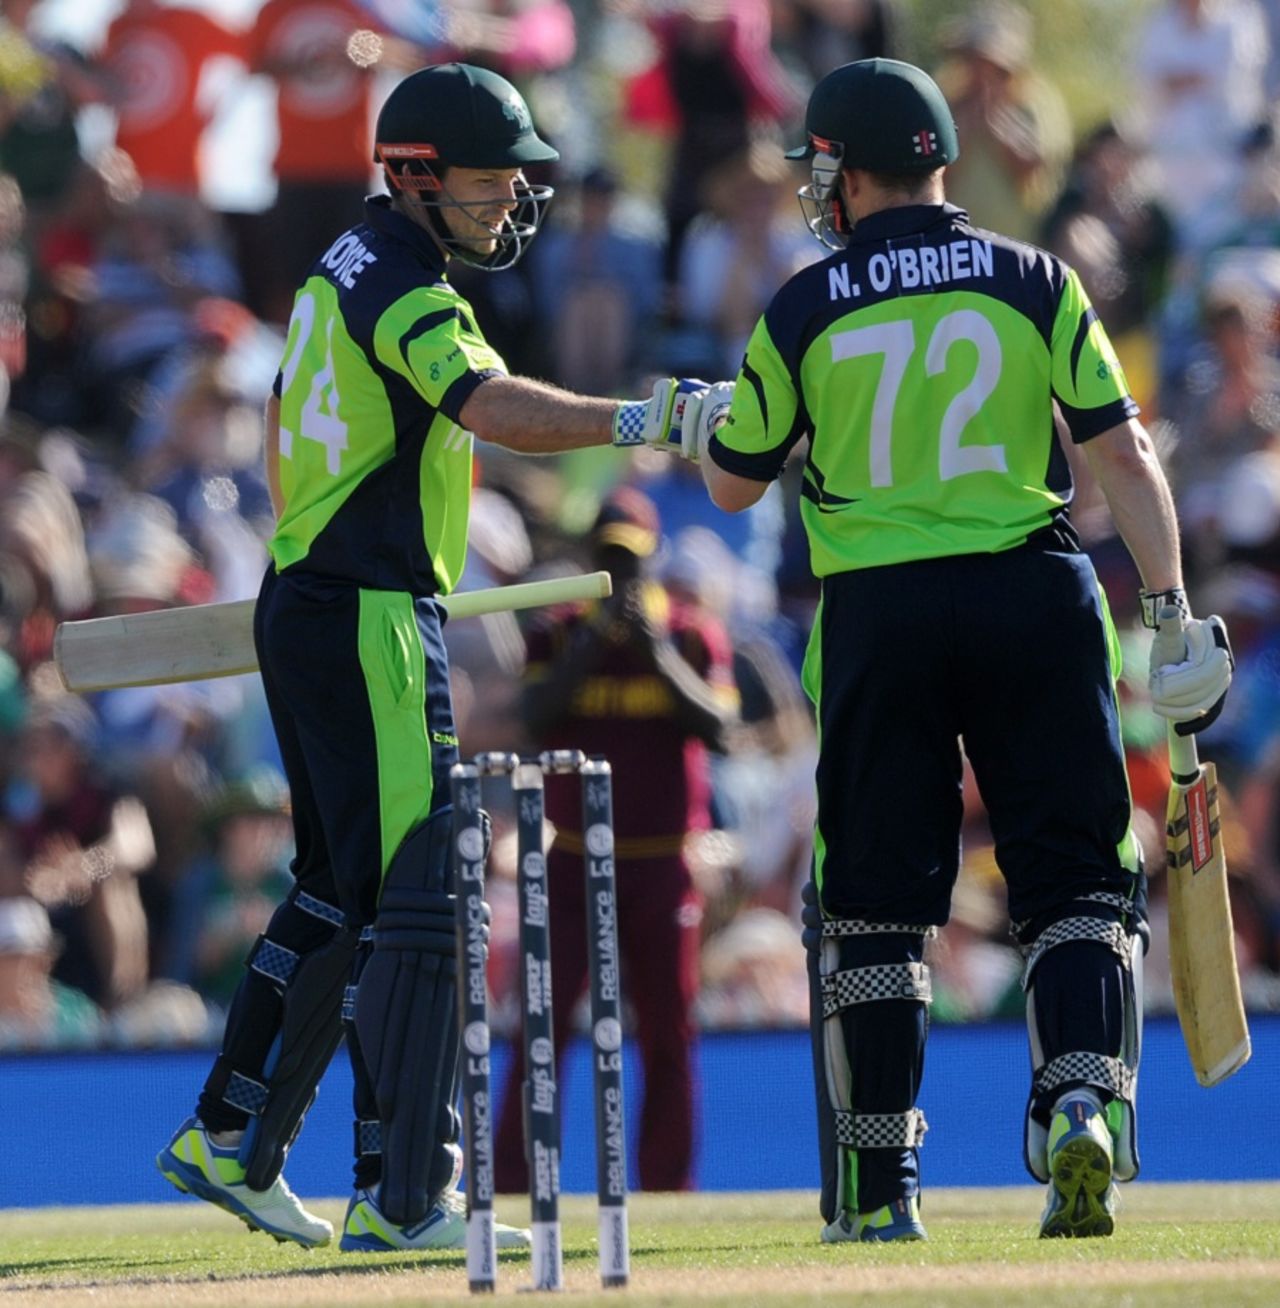 Ed Joyce and Niall O'Brien put on 96 runs for the third wicket, Ireland v West Indies, World Cup 2015, Group B, Nelson, February 16, 2015